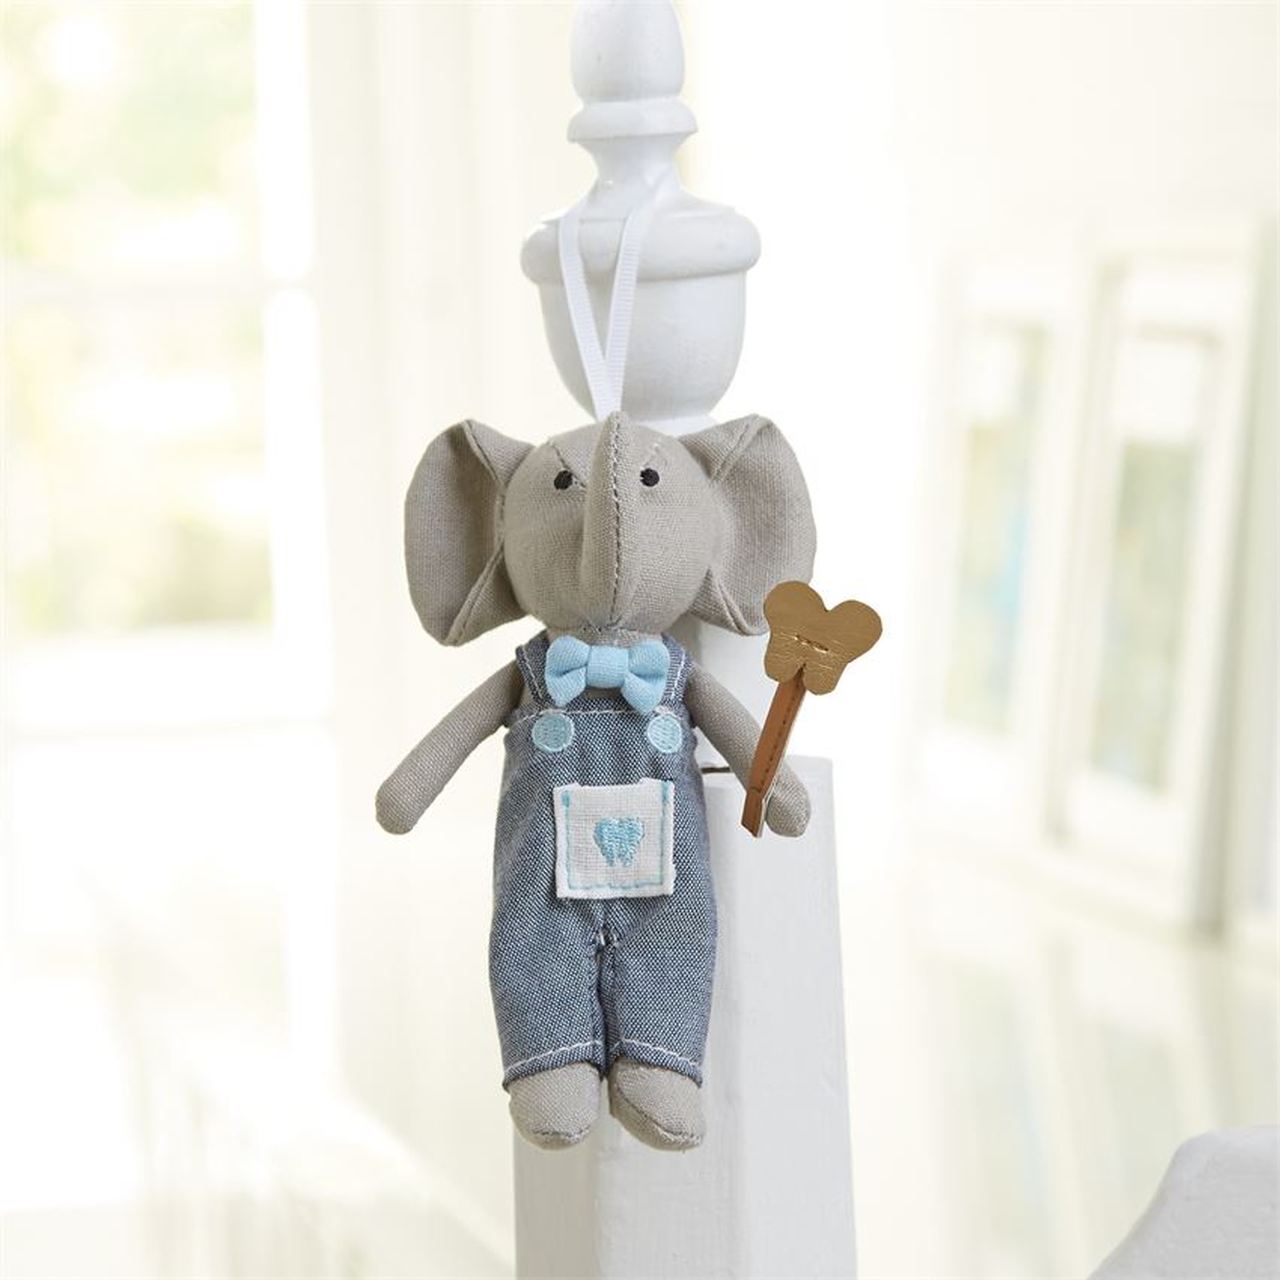 alt=“Blue and grey Tooth Fairy elephant pocket buddy doll complete with fairy wand, bowtie and chambray bib overalls features a special front pocket to place a lost tooth and hangs from a grosgrain ribbon, comes packaged in corrugated gift box”